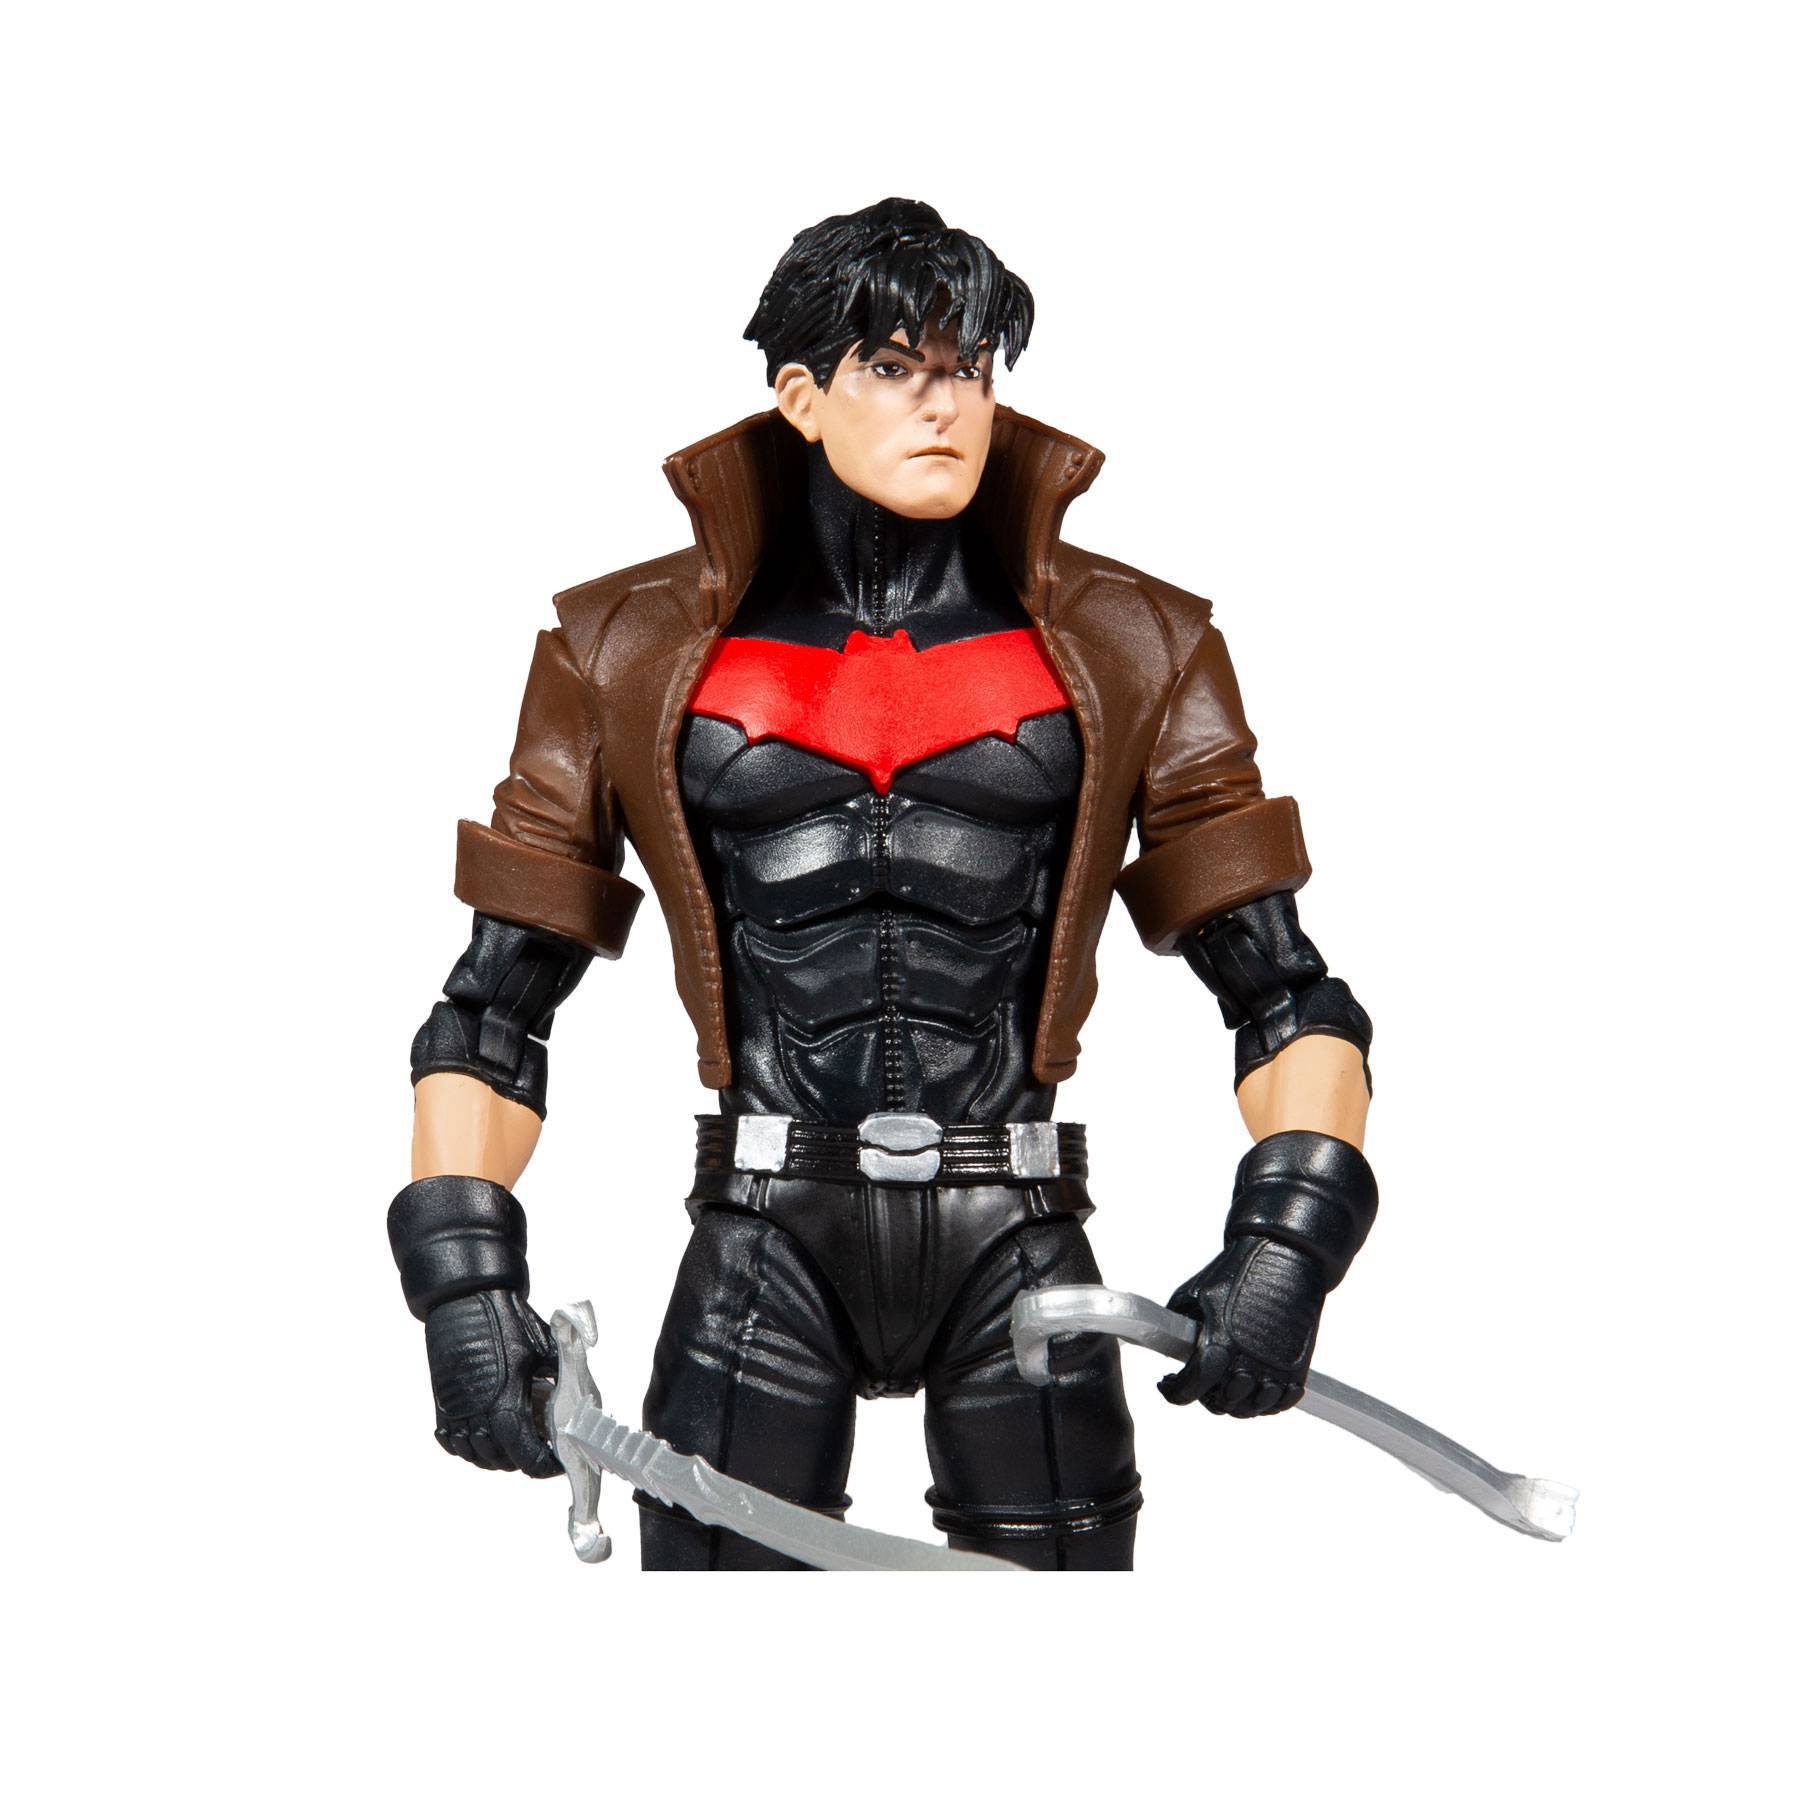 The New 52 DC Multiverse Actionfigur Red Hood Unmasked (Gold Label) 18 cm MCF15170 787926151701